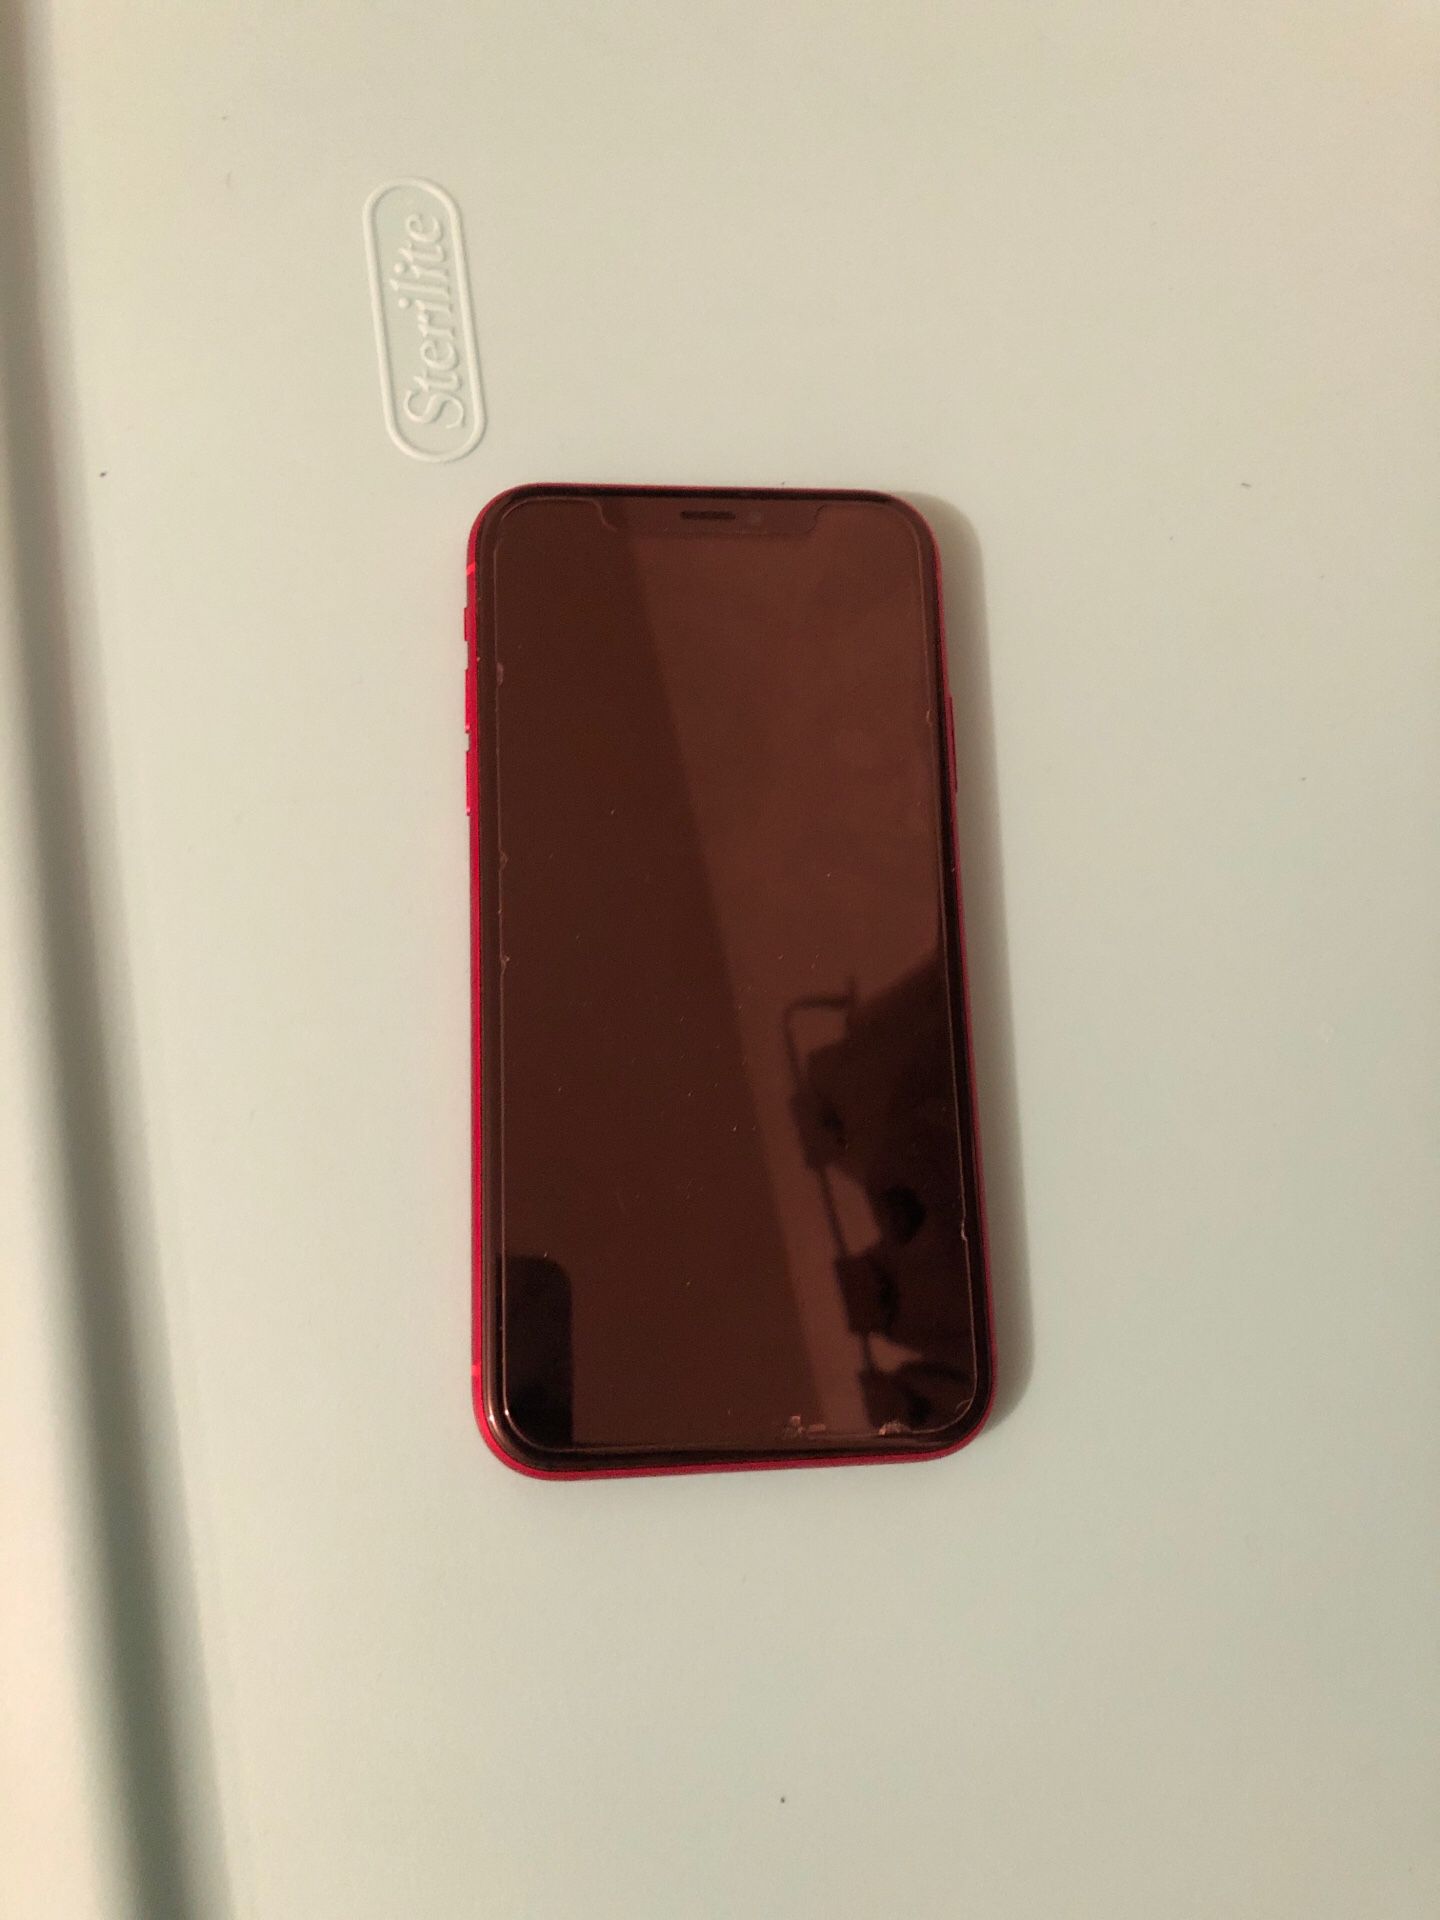 iPhone XR (T-mobile) $450 64 gb (blacklisted)